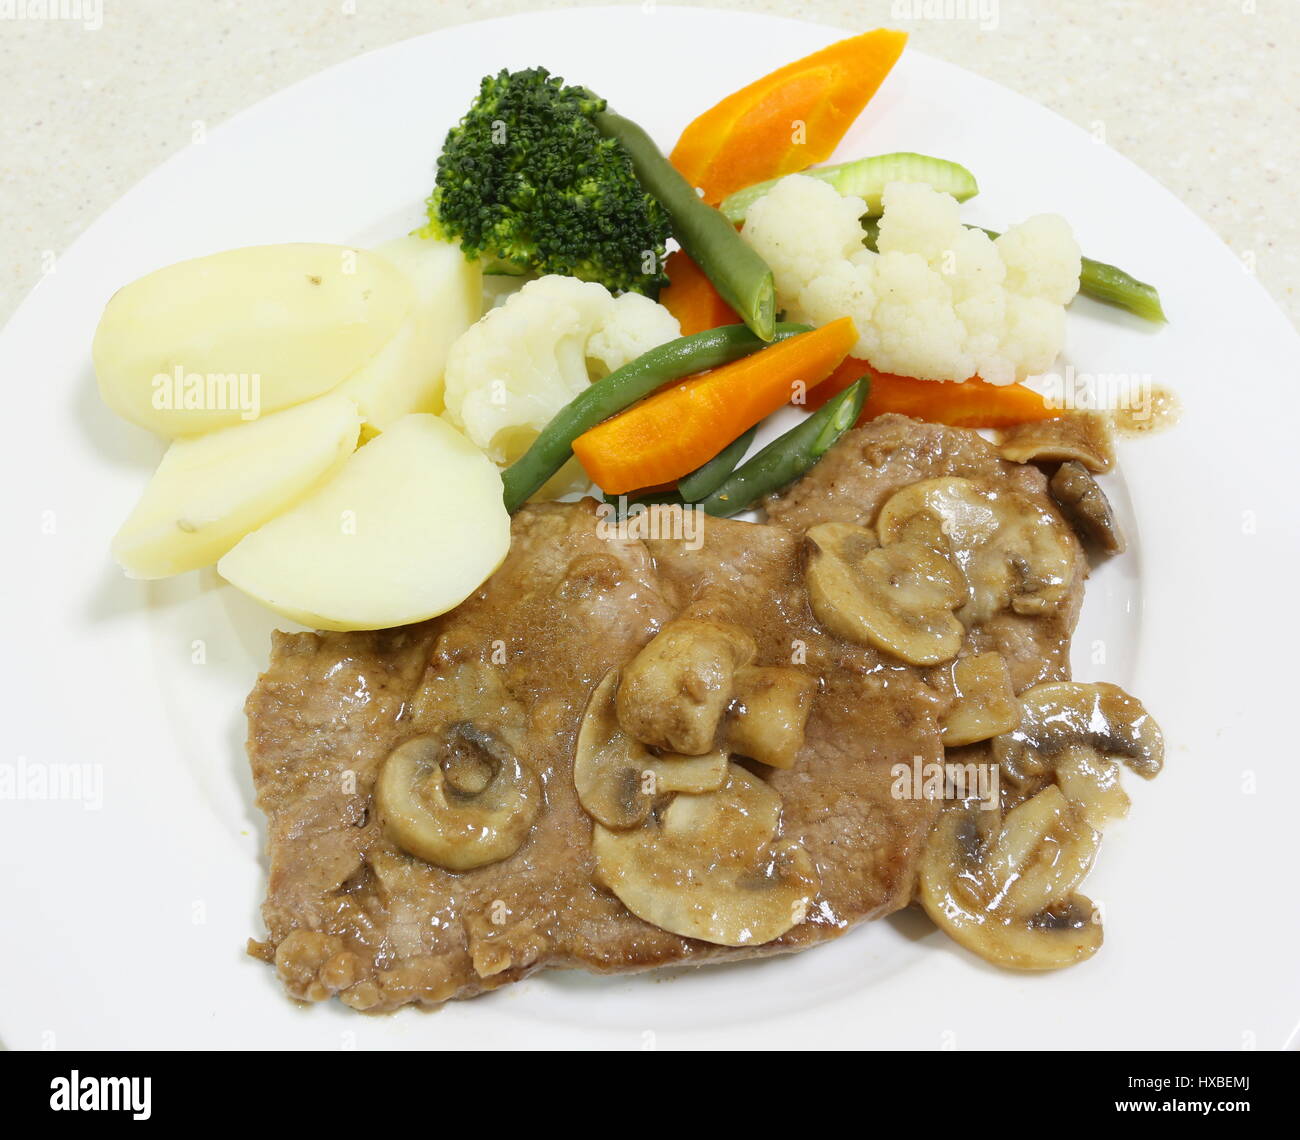 Roast beef served with a mushroom gravy, boiled potatoes and steamed vegetables, from above Stock Photo